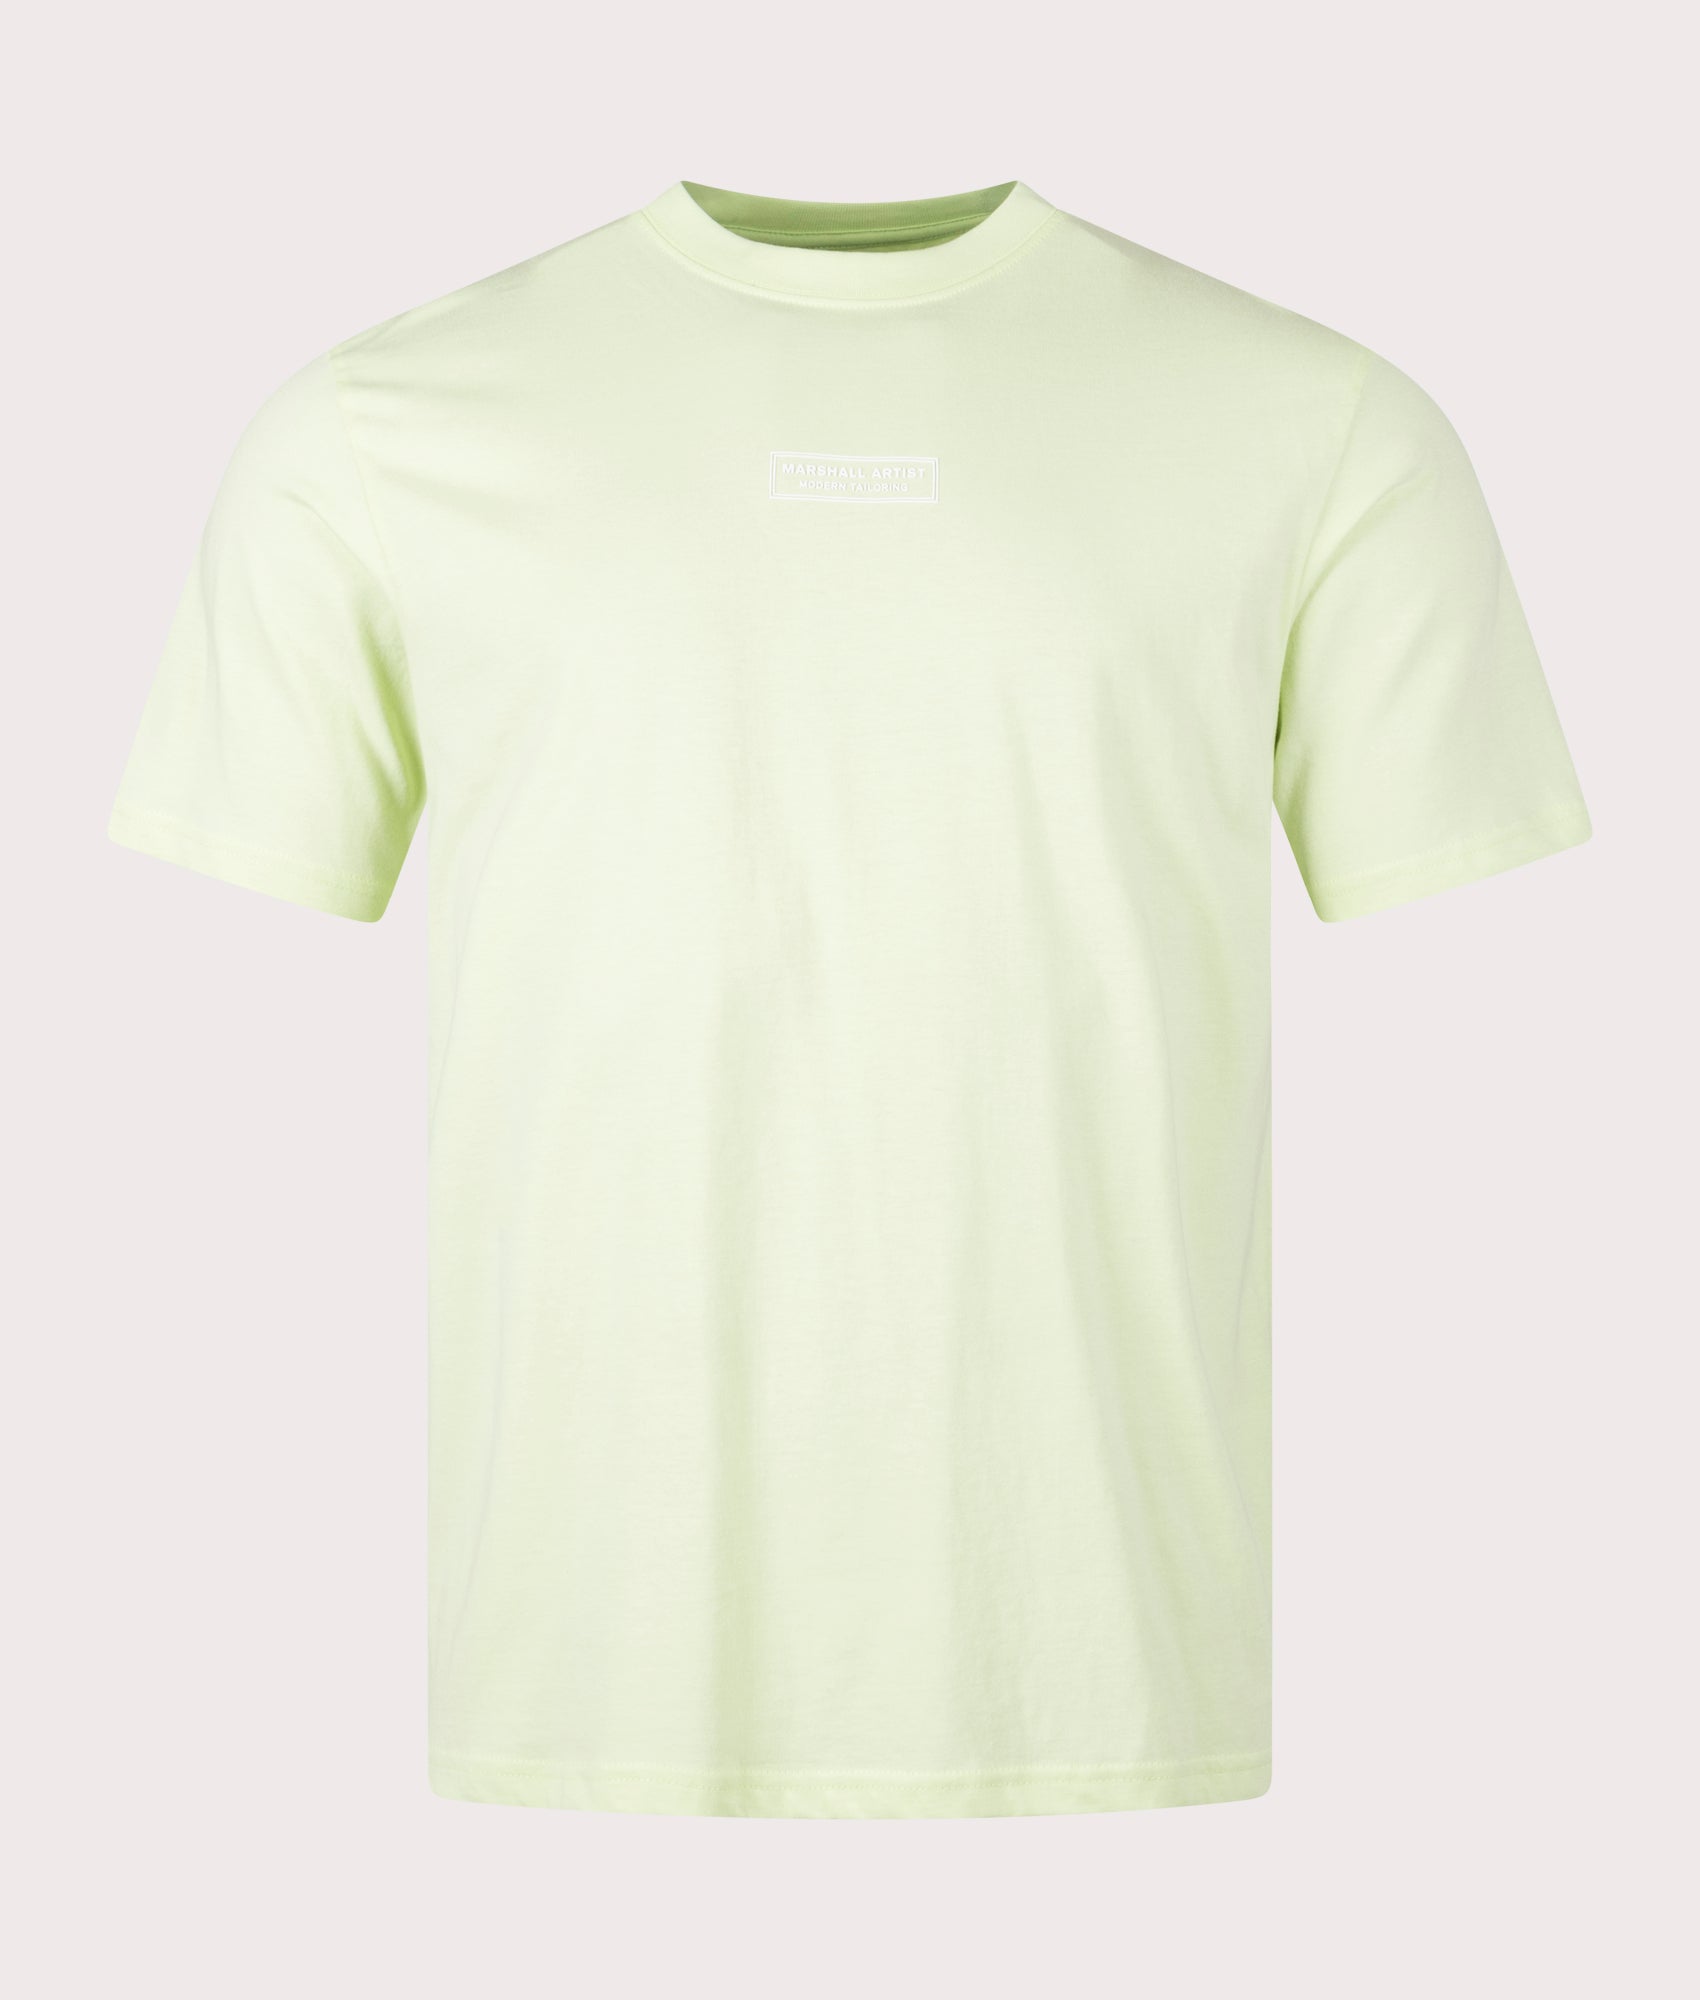 Marshall Artist Mens Injection T-Shirt - Colour: 073 Lime - Size: XL